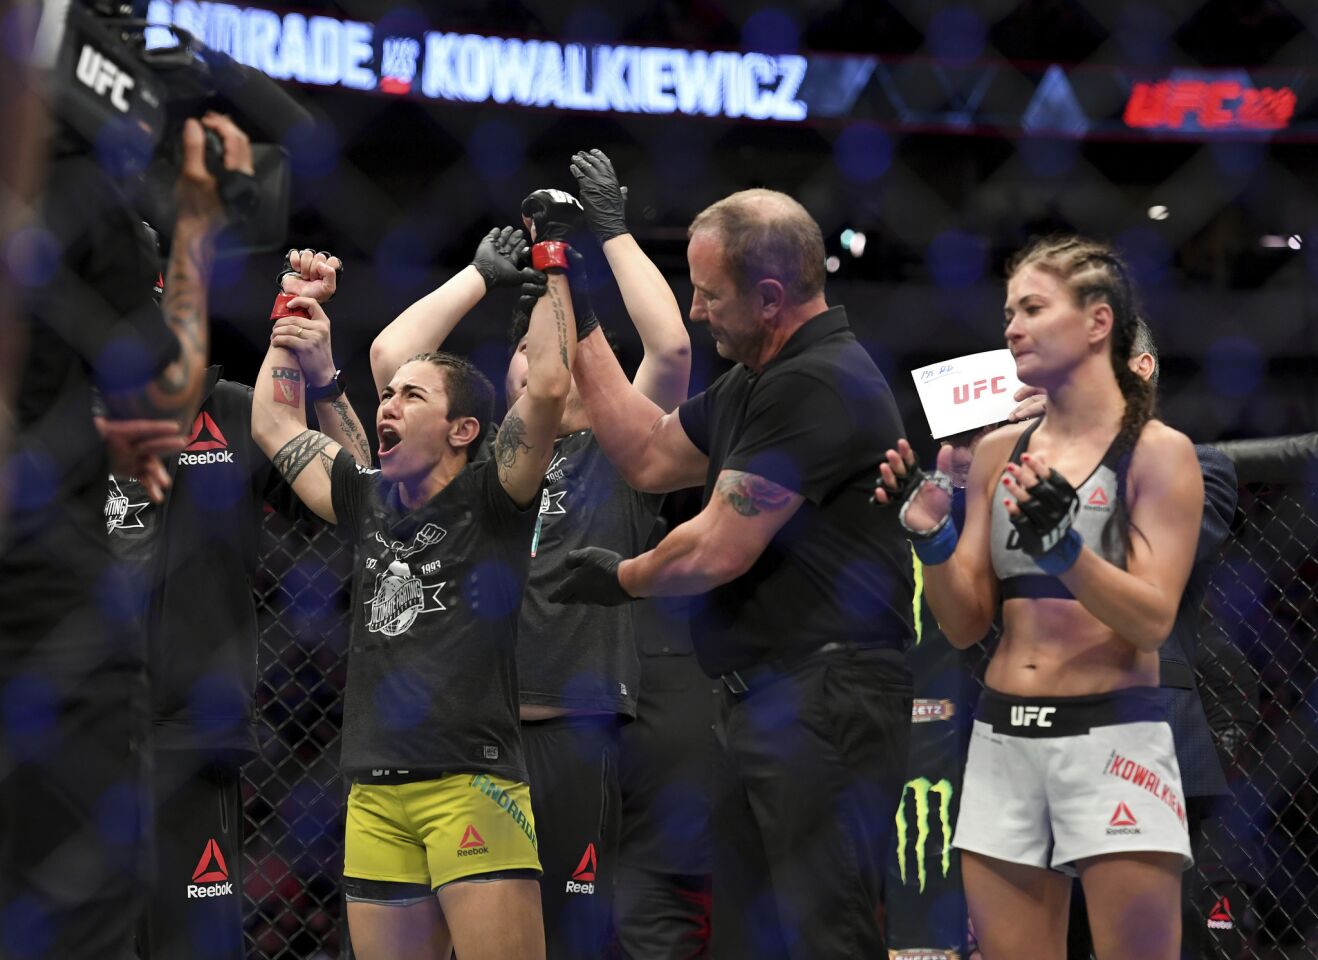 Jessica Andrade, left, is acknowledged as the winner after knocking out Karolina Kowalkiewicz, right, in their strawweight title mixed martial arts bout at UFC 228 on Saturday, Sept. 8, 2018, in Dallas. (AP Photo/Jeffrey McWhorter)